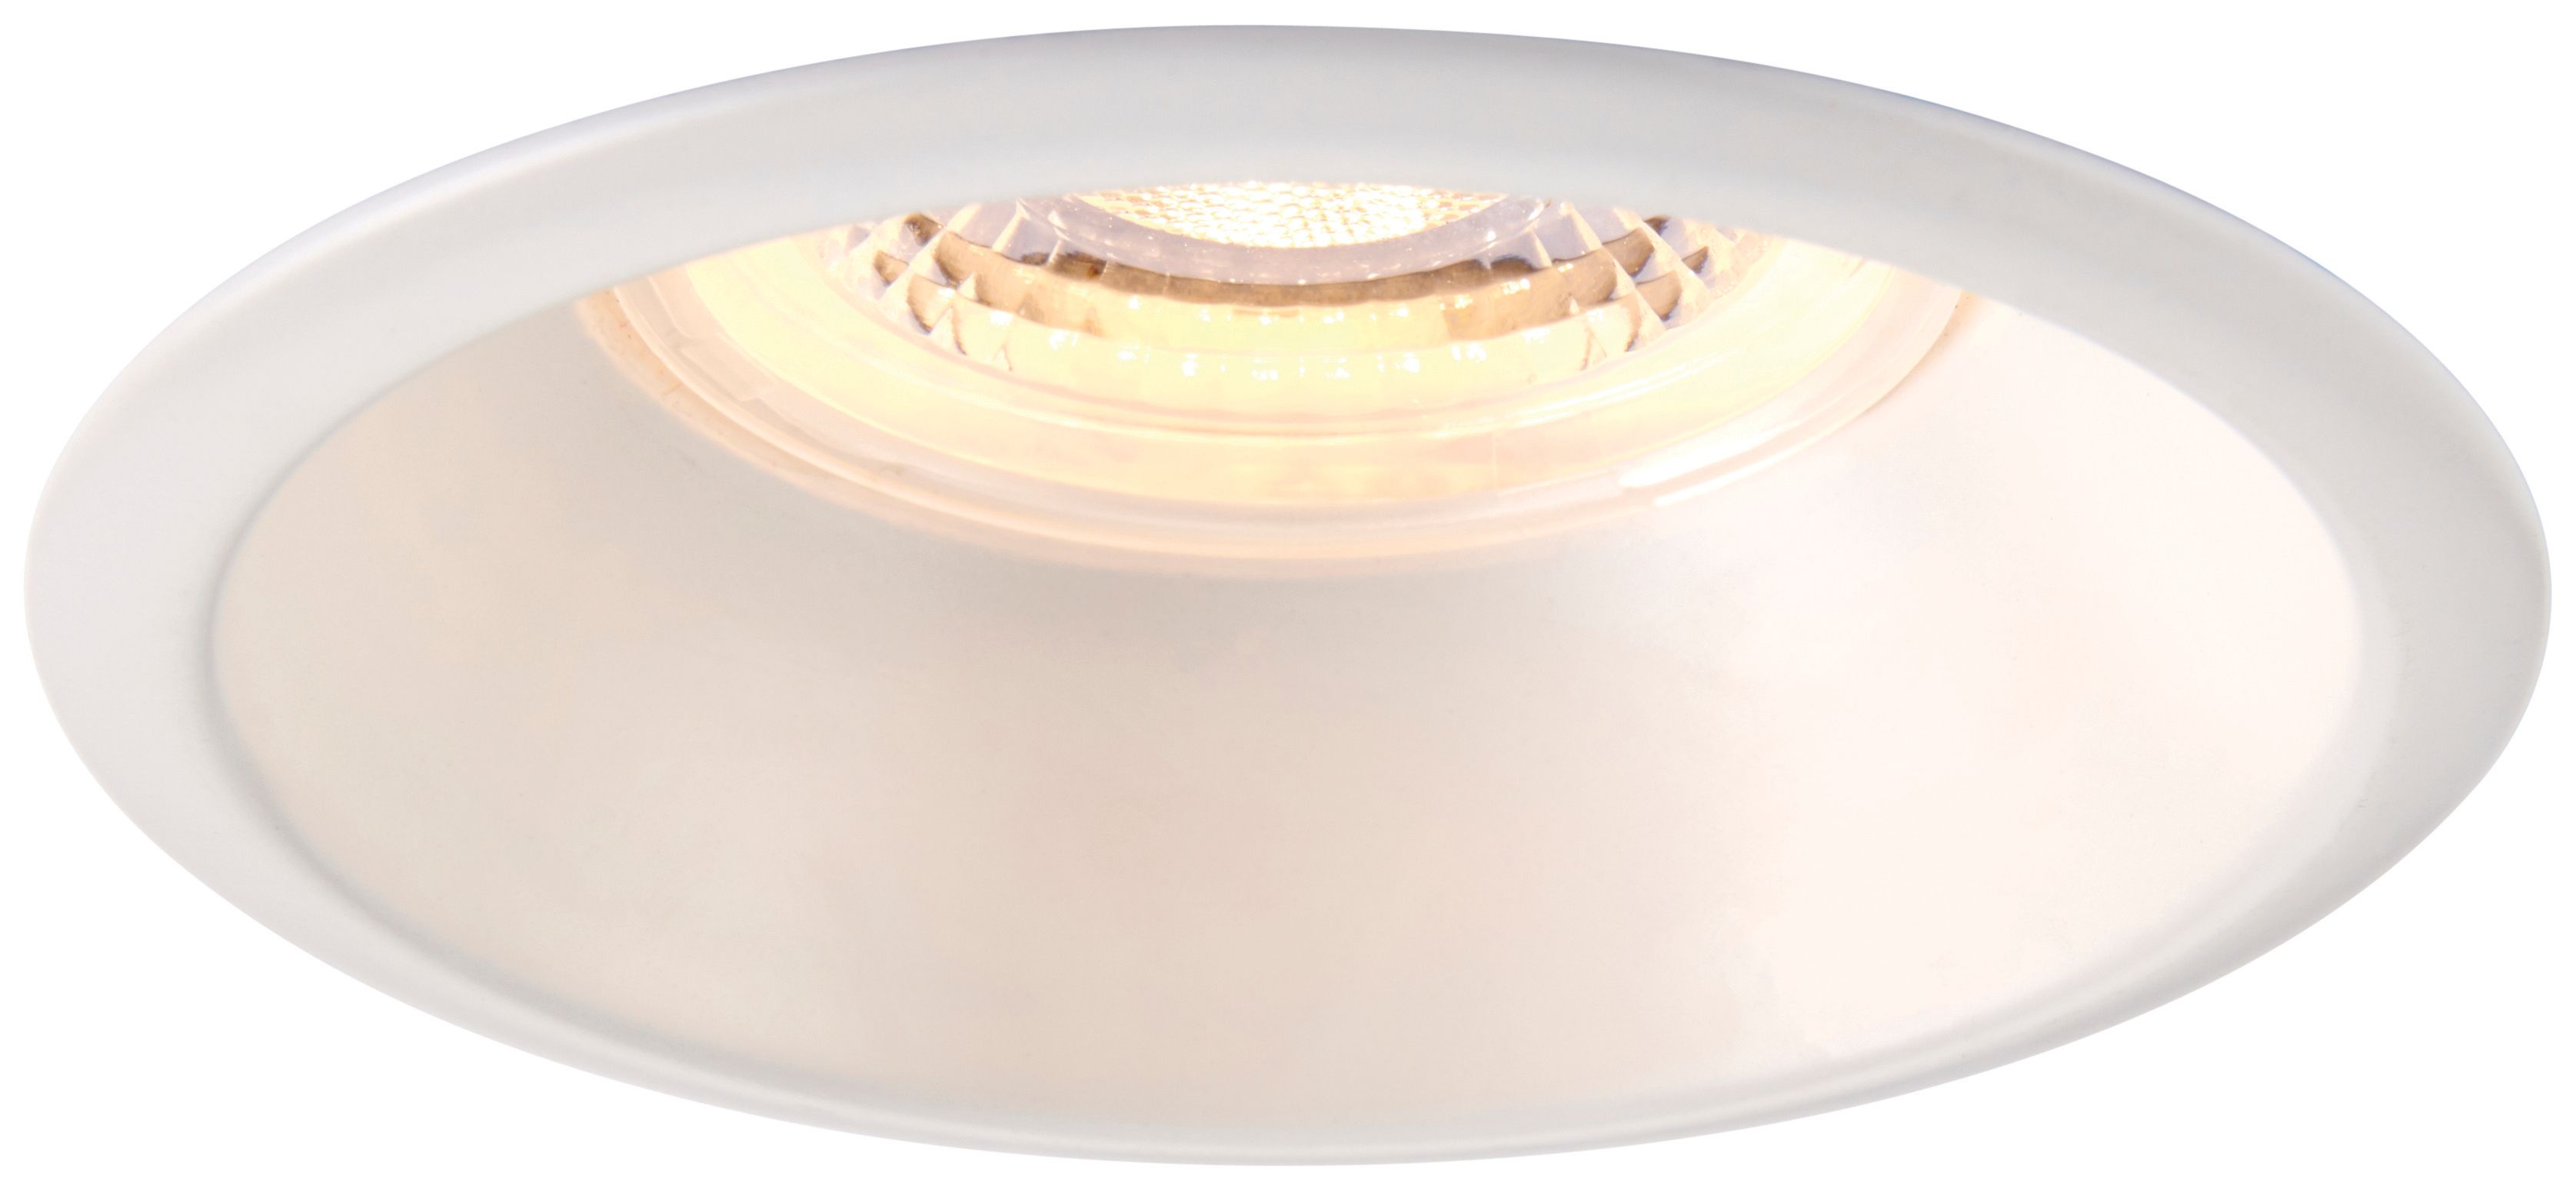 Saxby Integrated LED Fire Rated Anti Glare IP65 Fixed Warm White Downlight